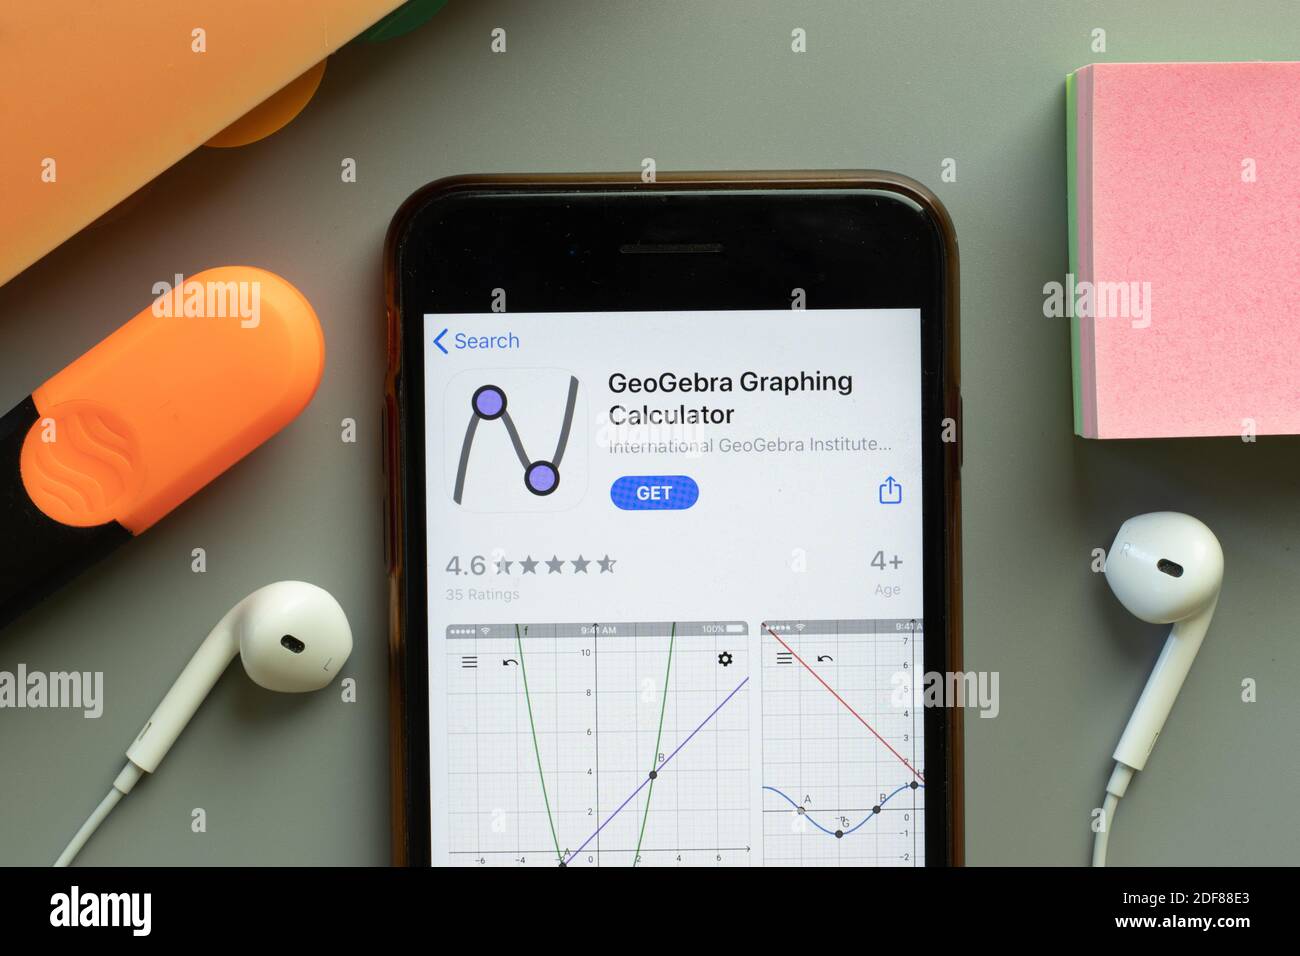 New York, USA - 1 December 2020: GeoGebra Graphing Calculator mobile app icon on phone screen top view, Illustrative Editorial. Stock Photo